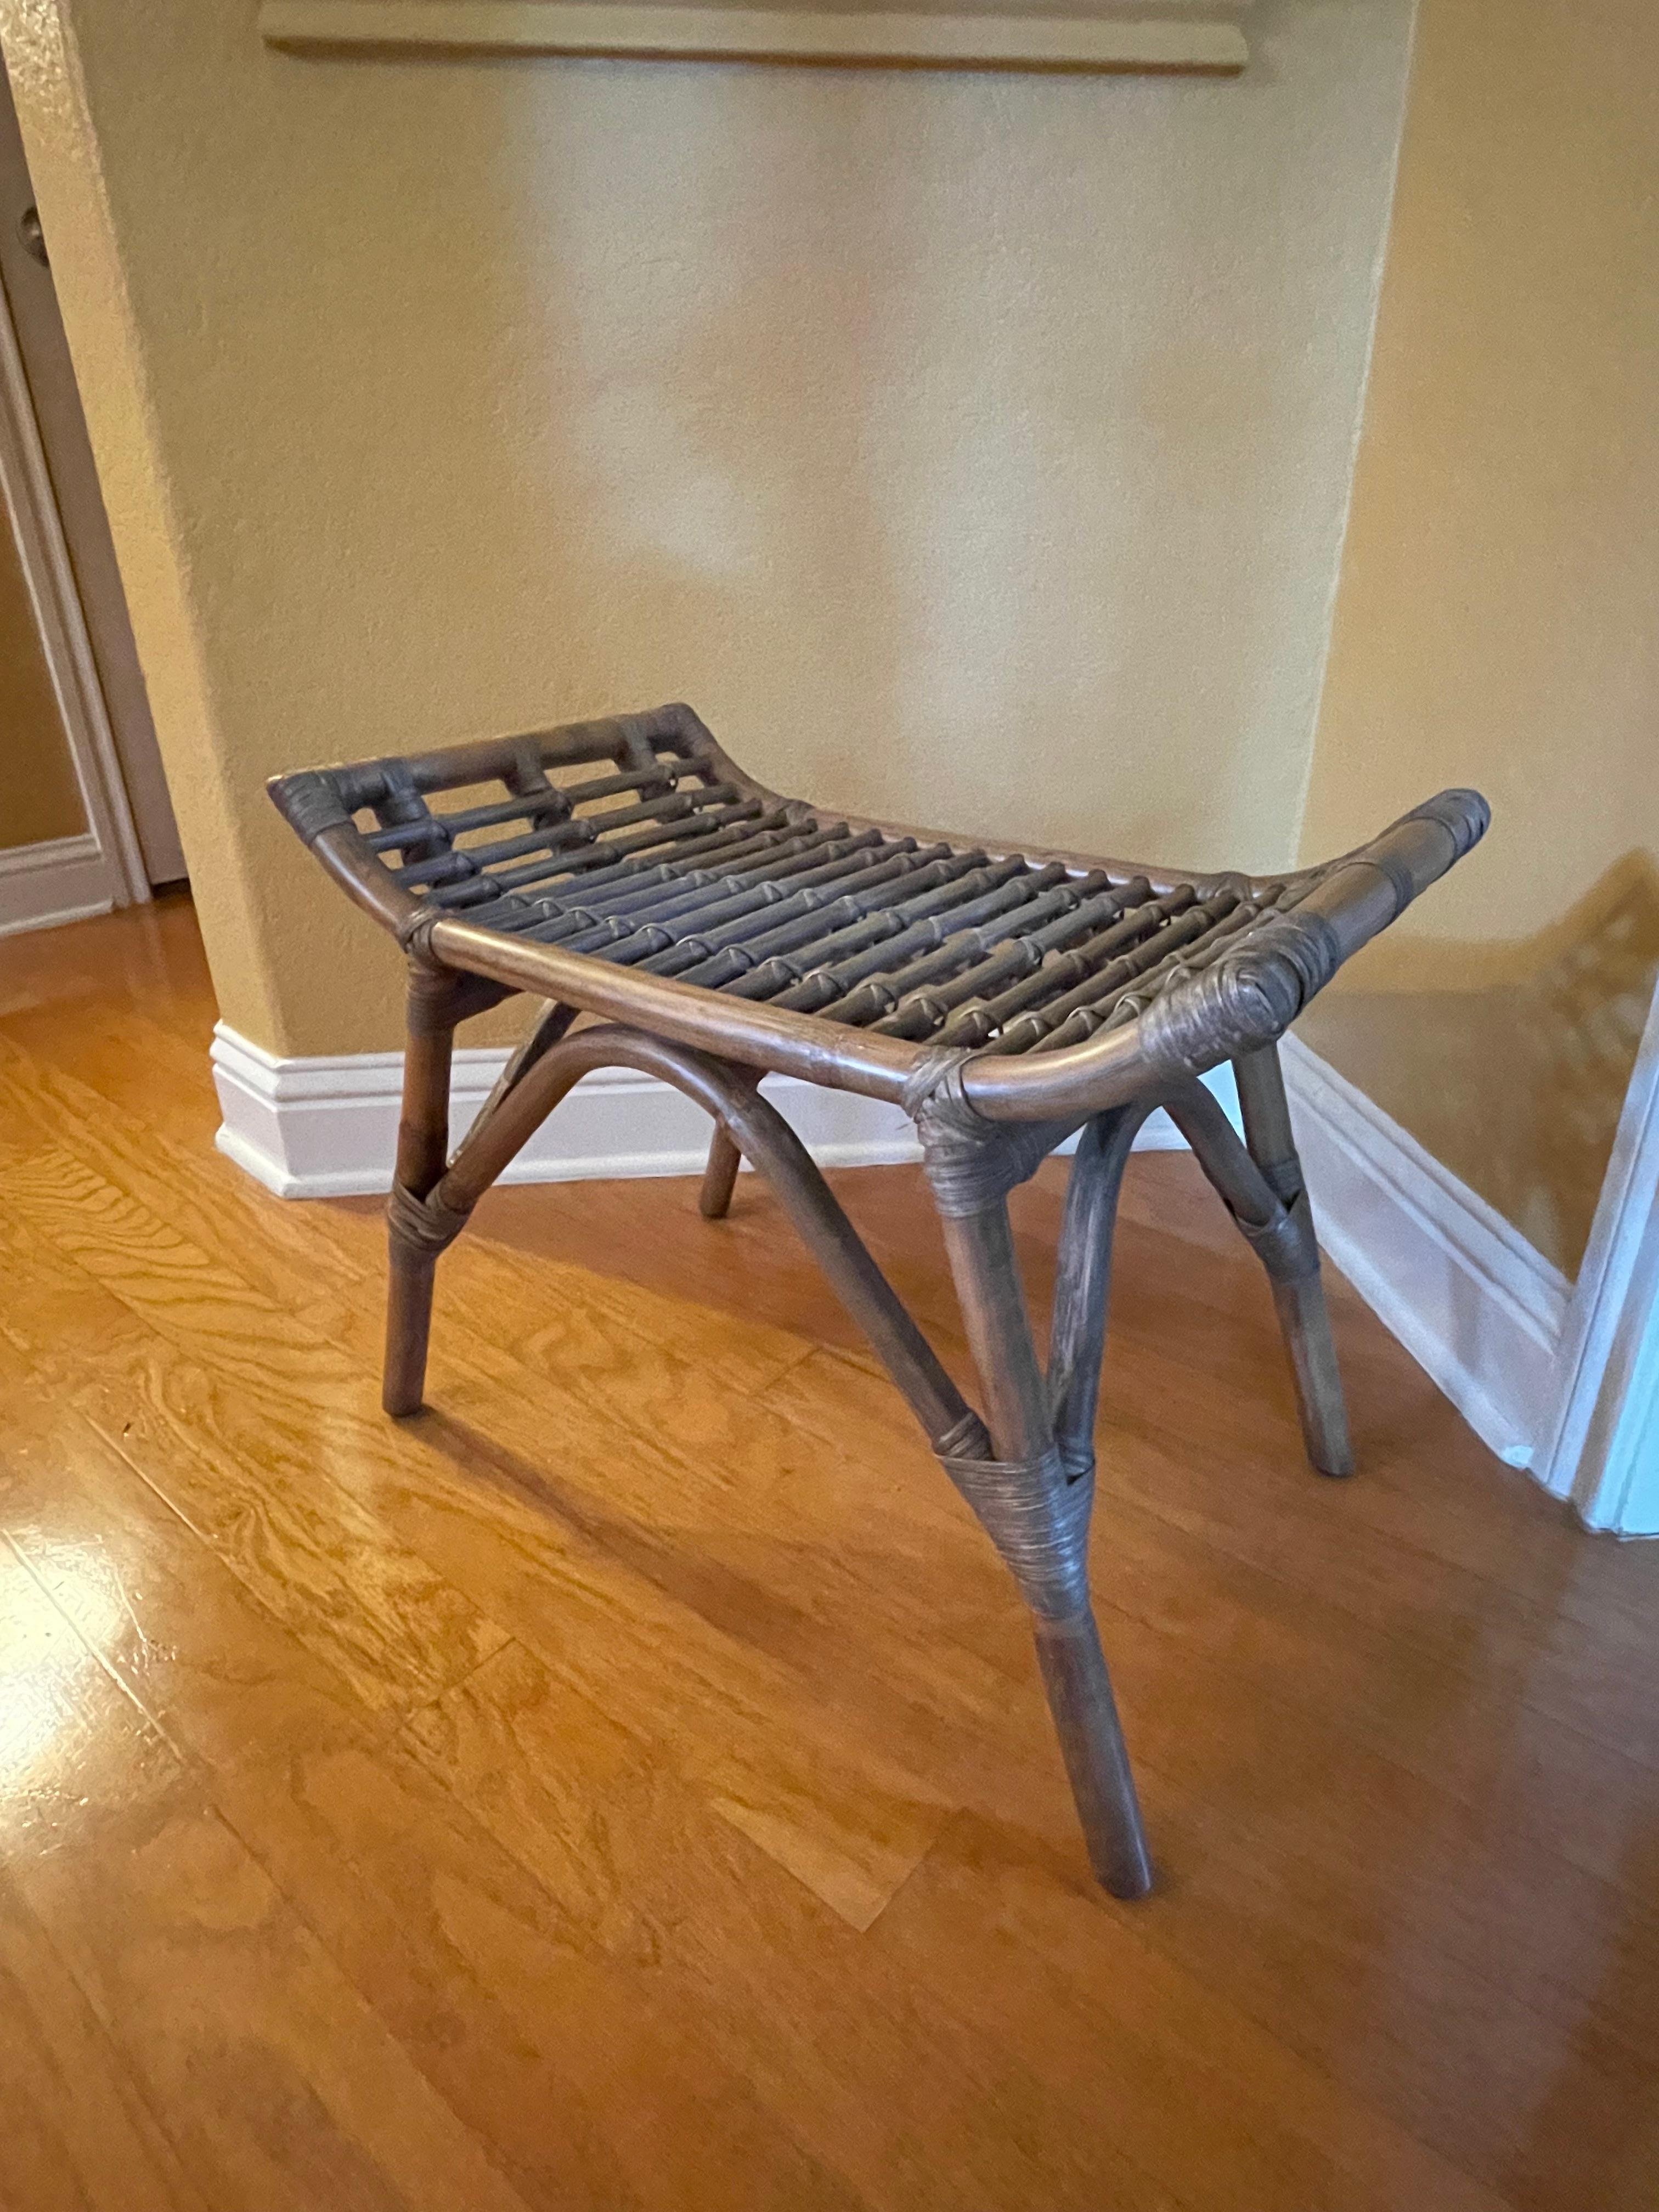 Driftwood-Color Rattan and Bamboo Bench or Footstool In Excellent Condition For Sale In Austin, TX